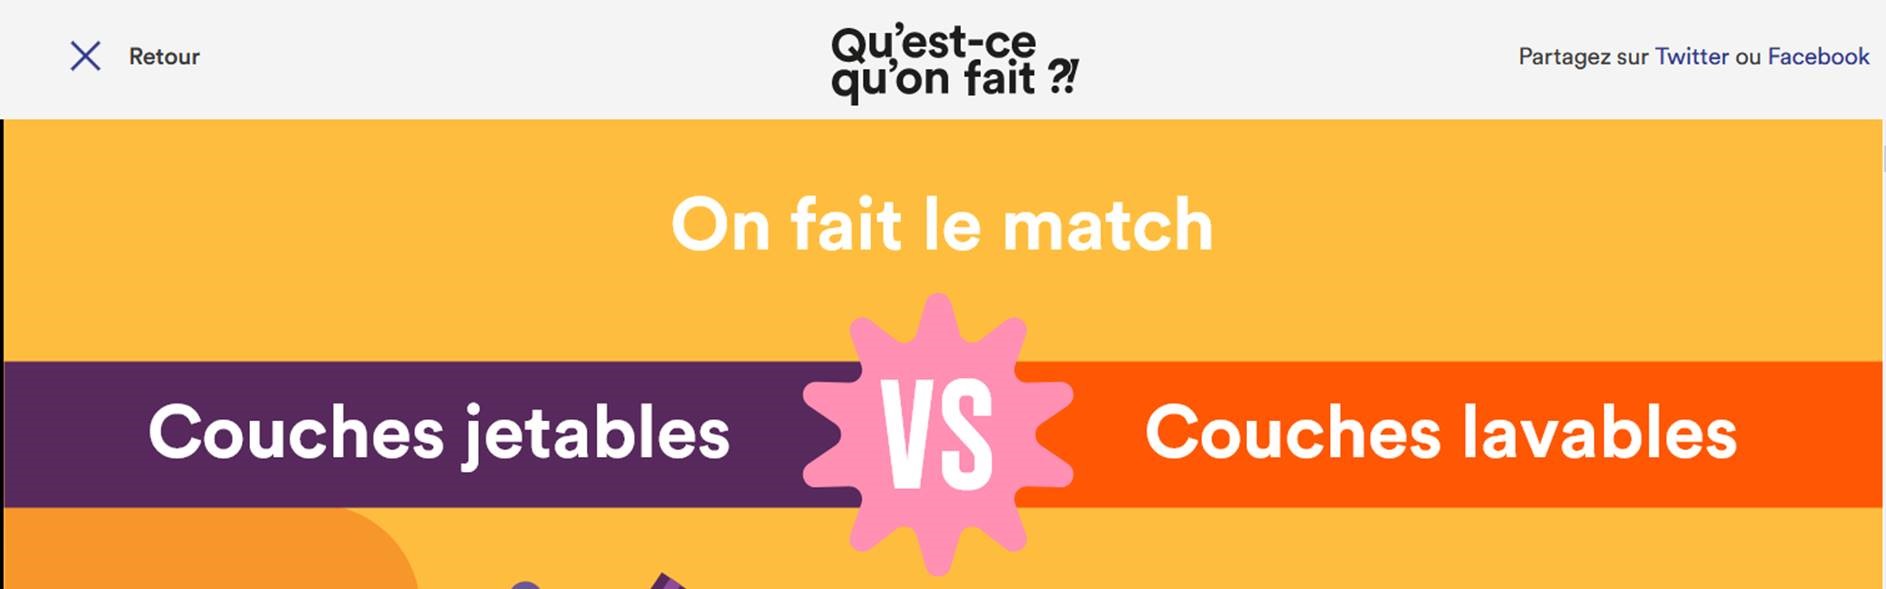 Match%20Couches%20lavables%20vs%20couches%20jetables.jpg